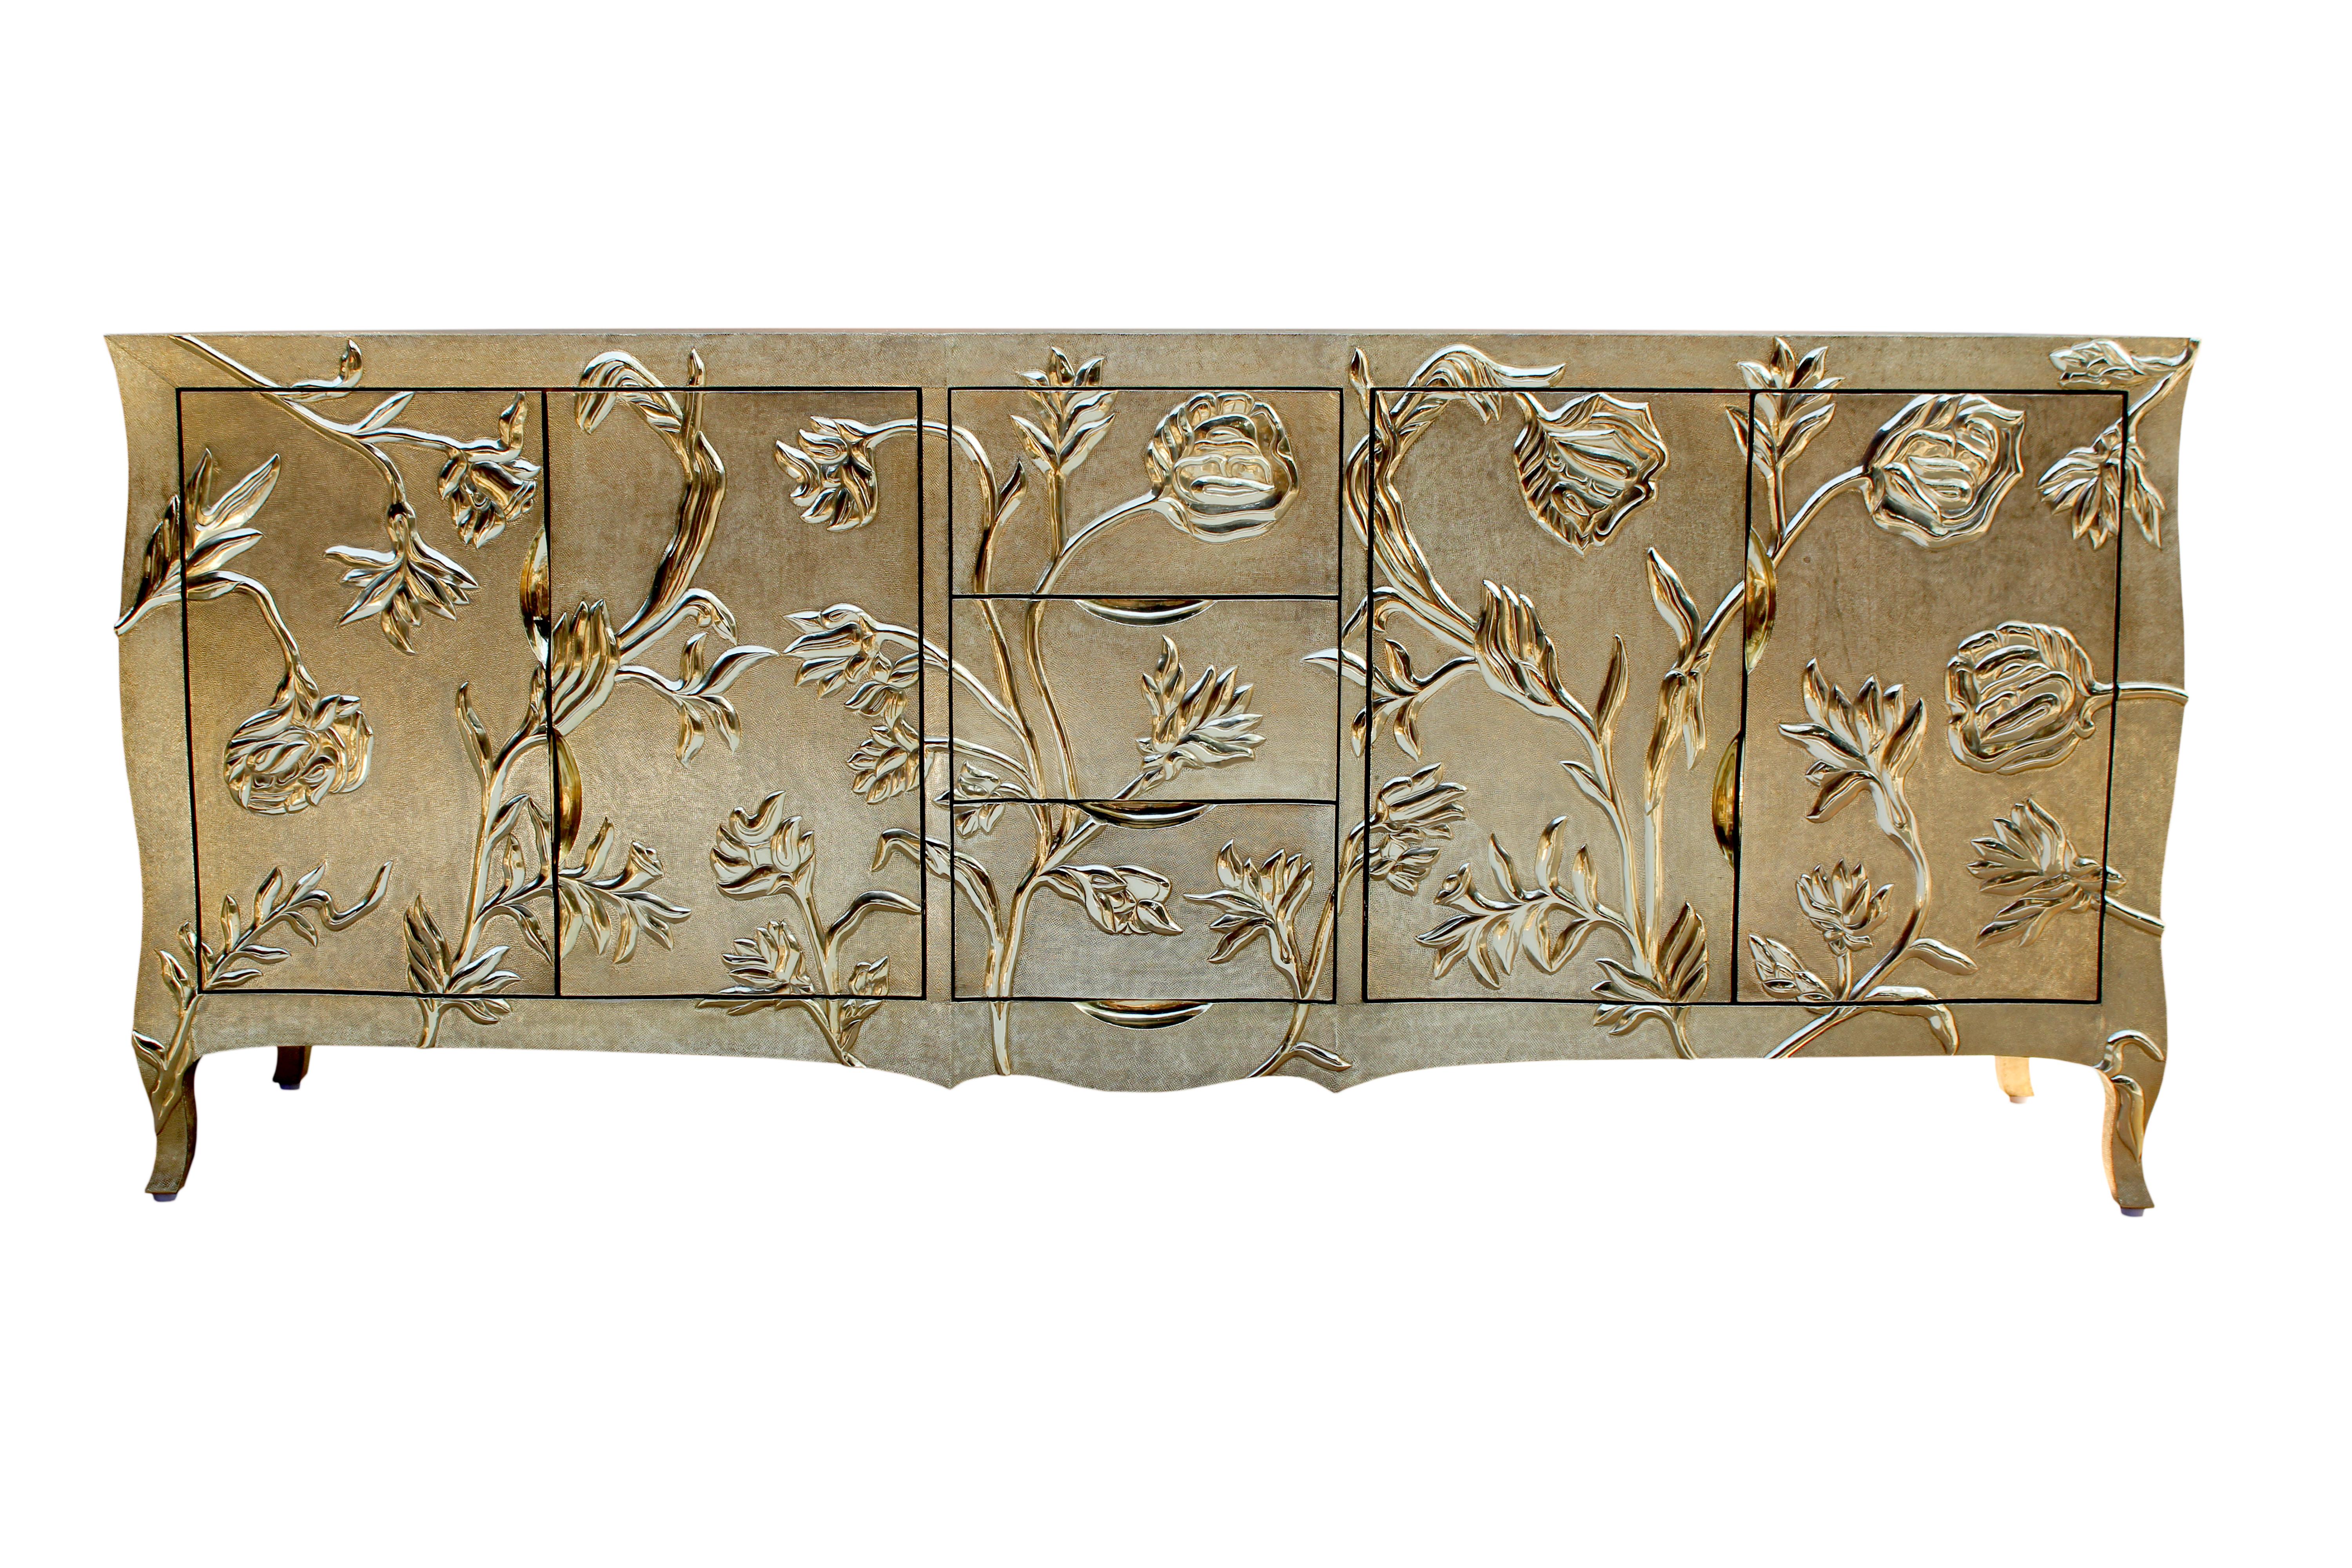 Louise Floral Art Deco Credenza Fine Hammered Brass by Paul Mathieu For Sale 3